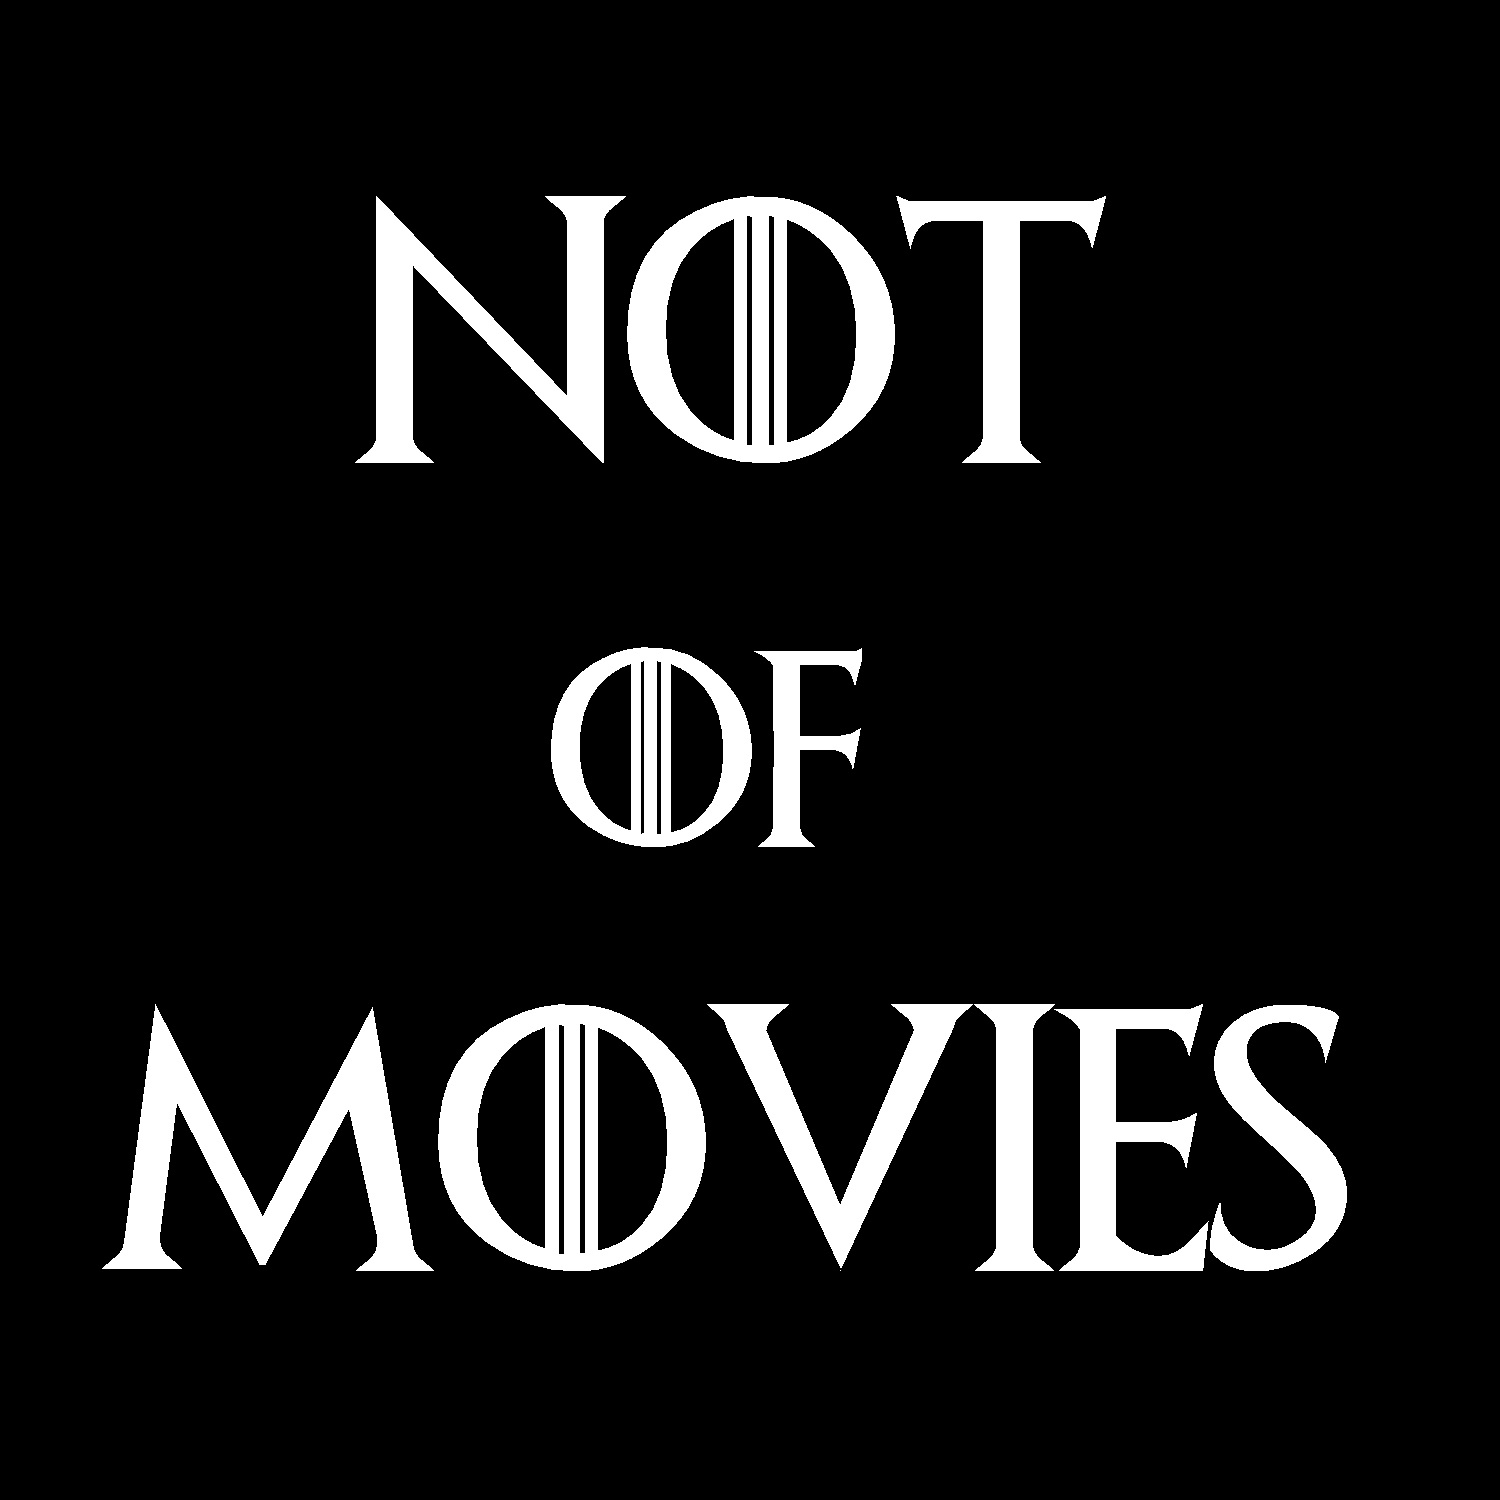 Episode 74 - Not of Movies